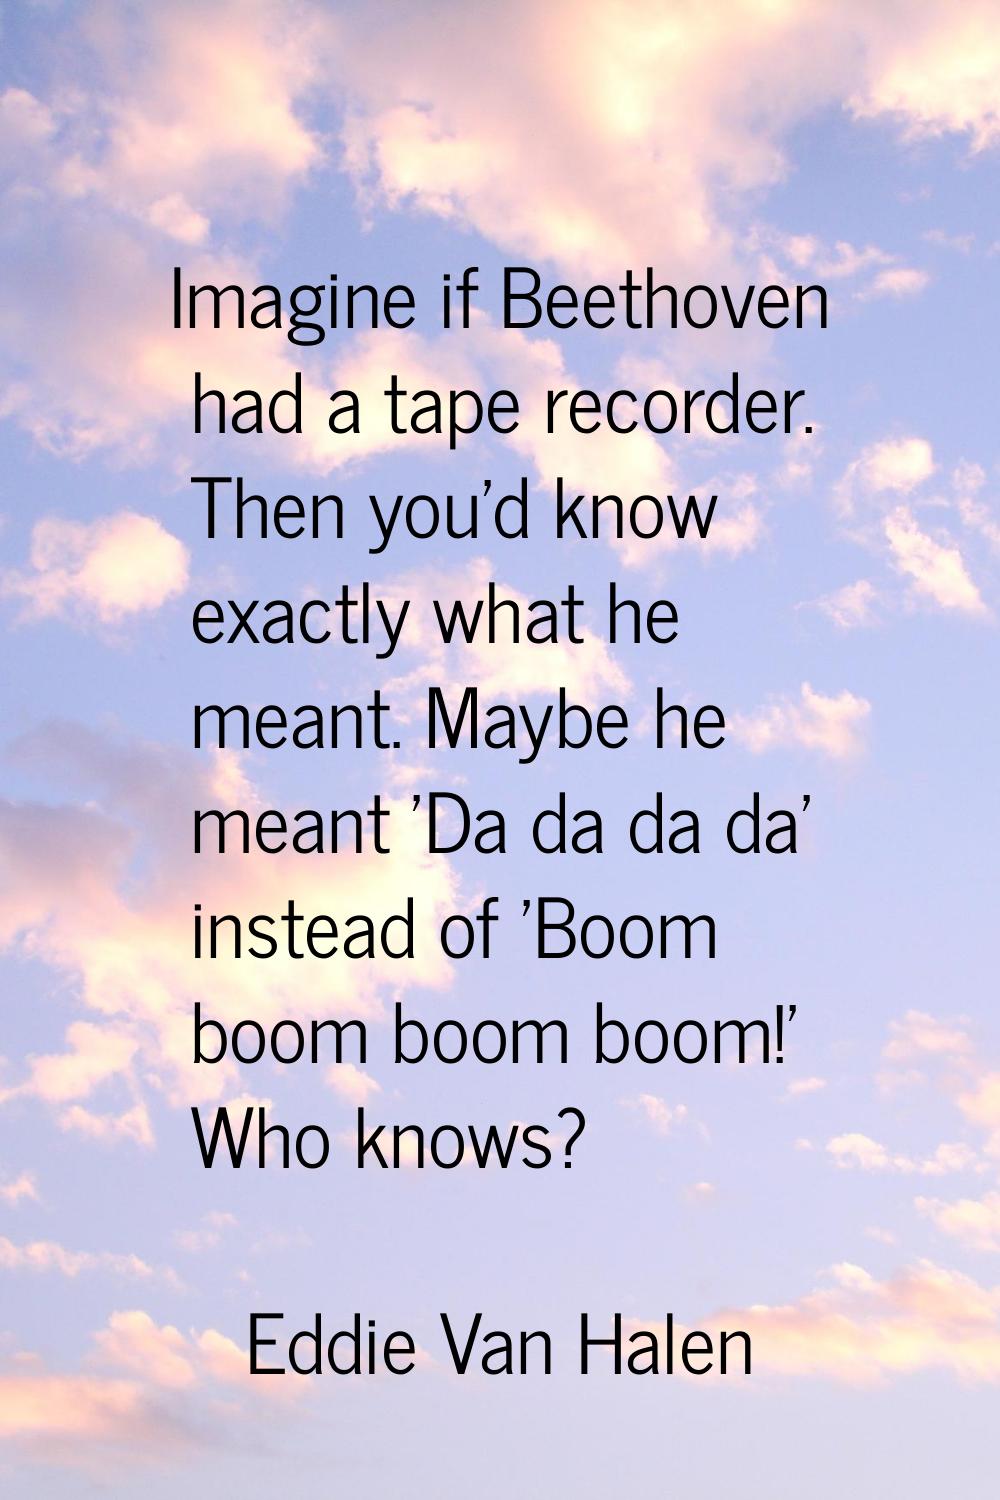 Imagine if Beethoven had a tape recorder. Then you'd know exactly what he meant. Maybe he meant 'Da